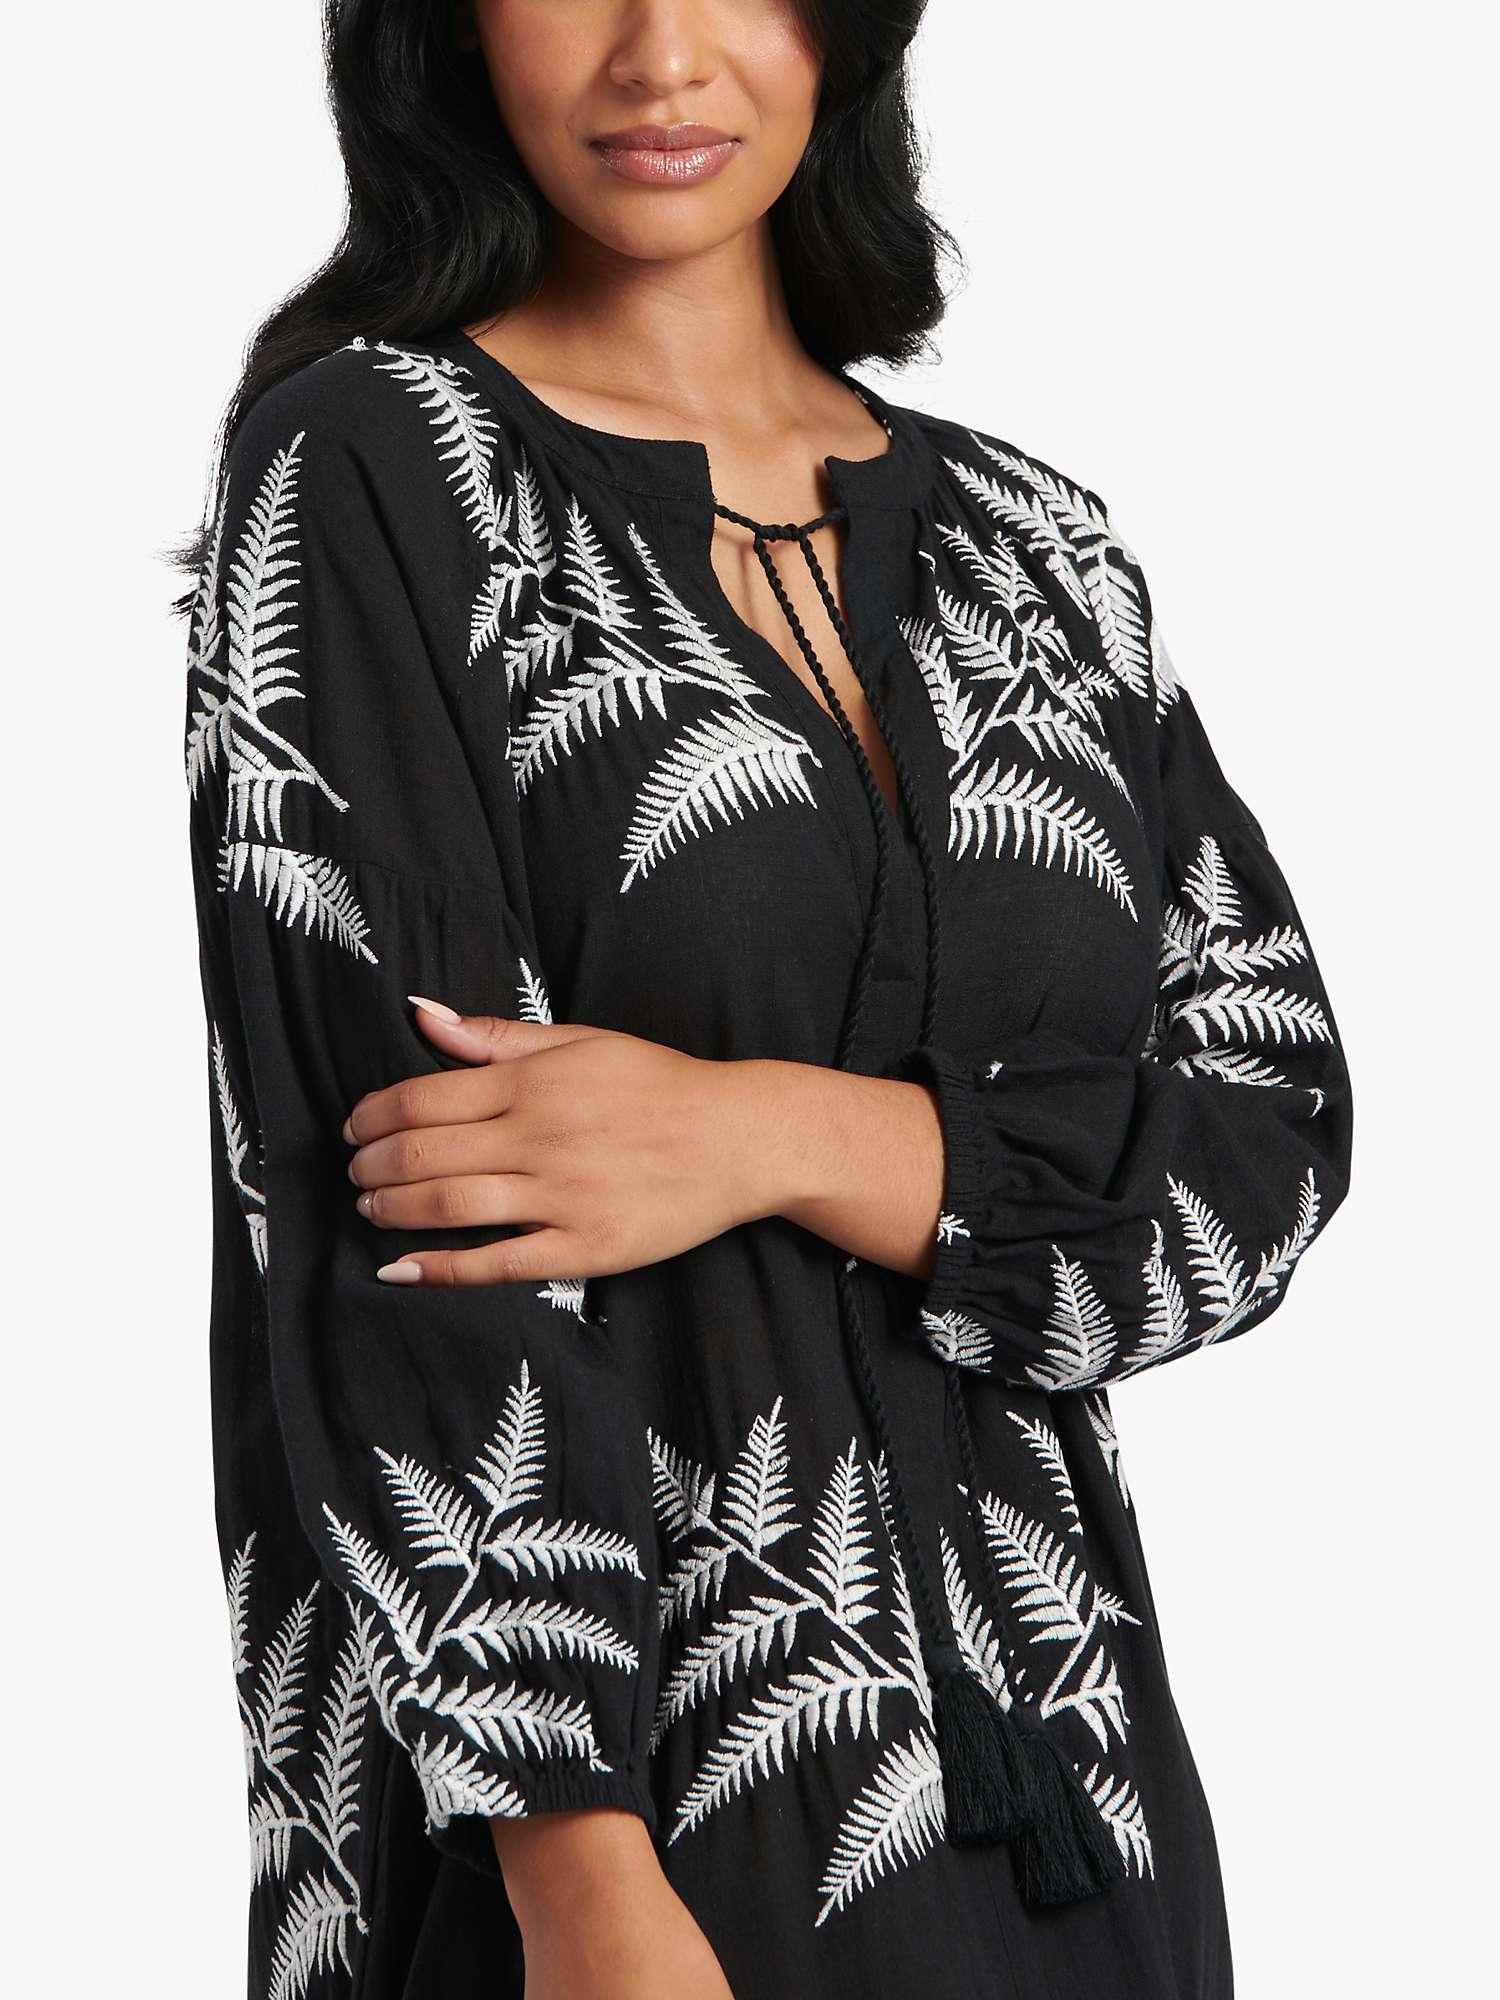 Buy South Beach Palm Embroidered Maxi Dress, Black/White Online at johnlewis.com